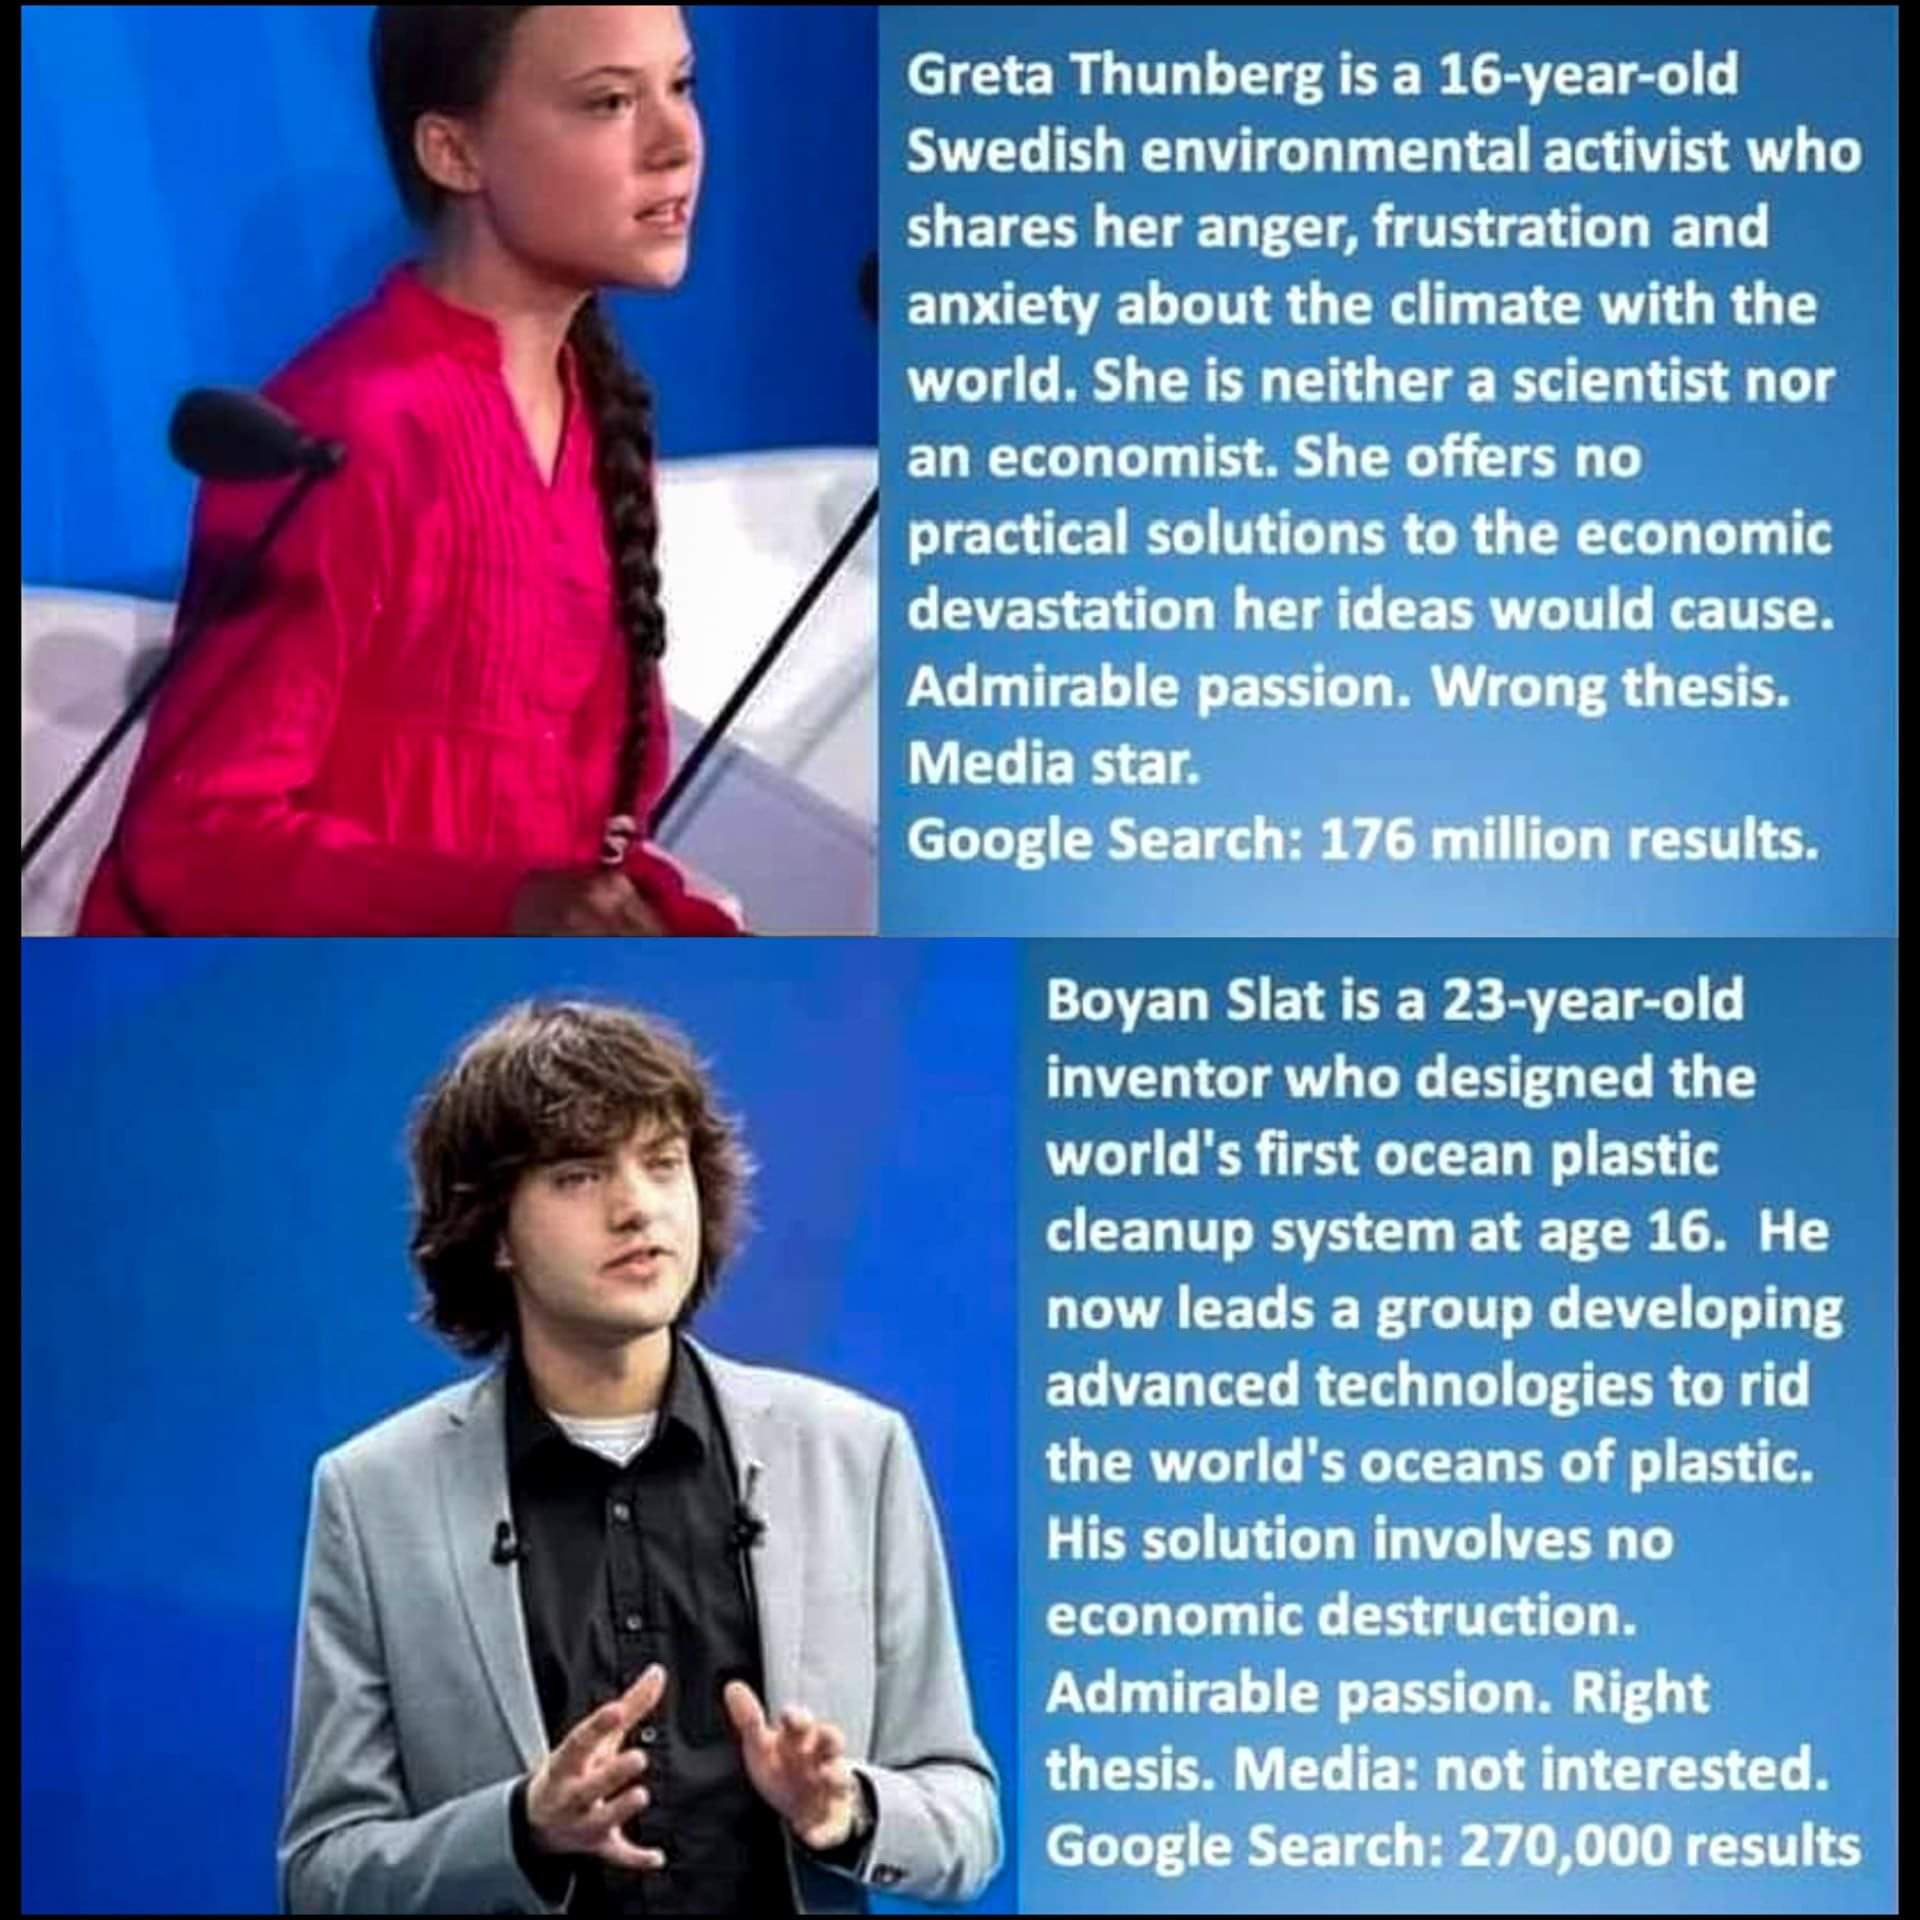 political political-memes political text: Greta Thunberg is a 16-year-old Swedish environmental activist who shares her anger, frustration and anxiety about the climate with the world. She is neither a scientist nor an economist. She offers no practical solutions to the economic devastation her ideas would cause. Admirable passion. Wrong thesis. Media star. Google Search: 176 million results. Boyan Slat is a 23-year-old inventor who designed the cleanup system at age 16. He now leads a group developing advanced technologies to rid the world's oceans of plastic. thesis. Media: not interested. Google Search: 270,000 results 